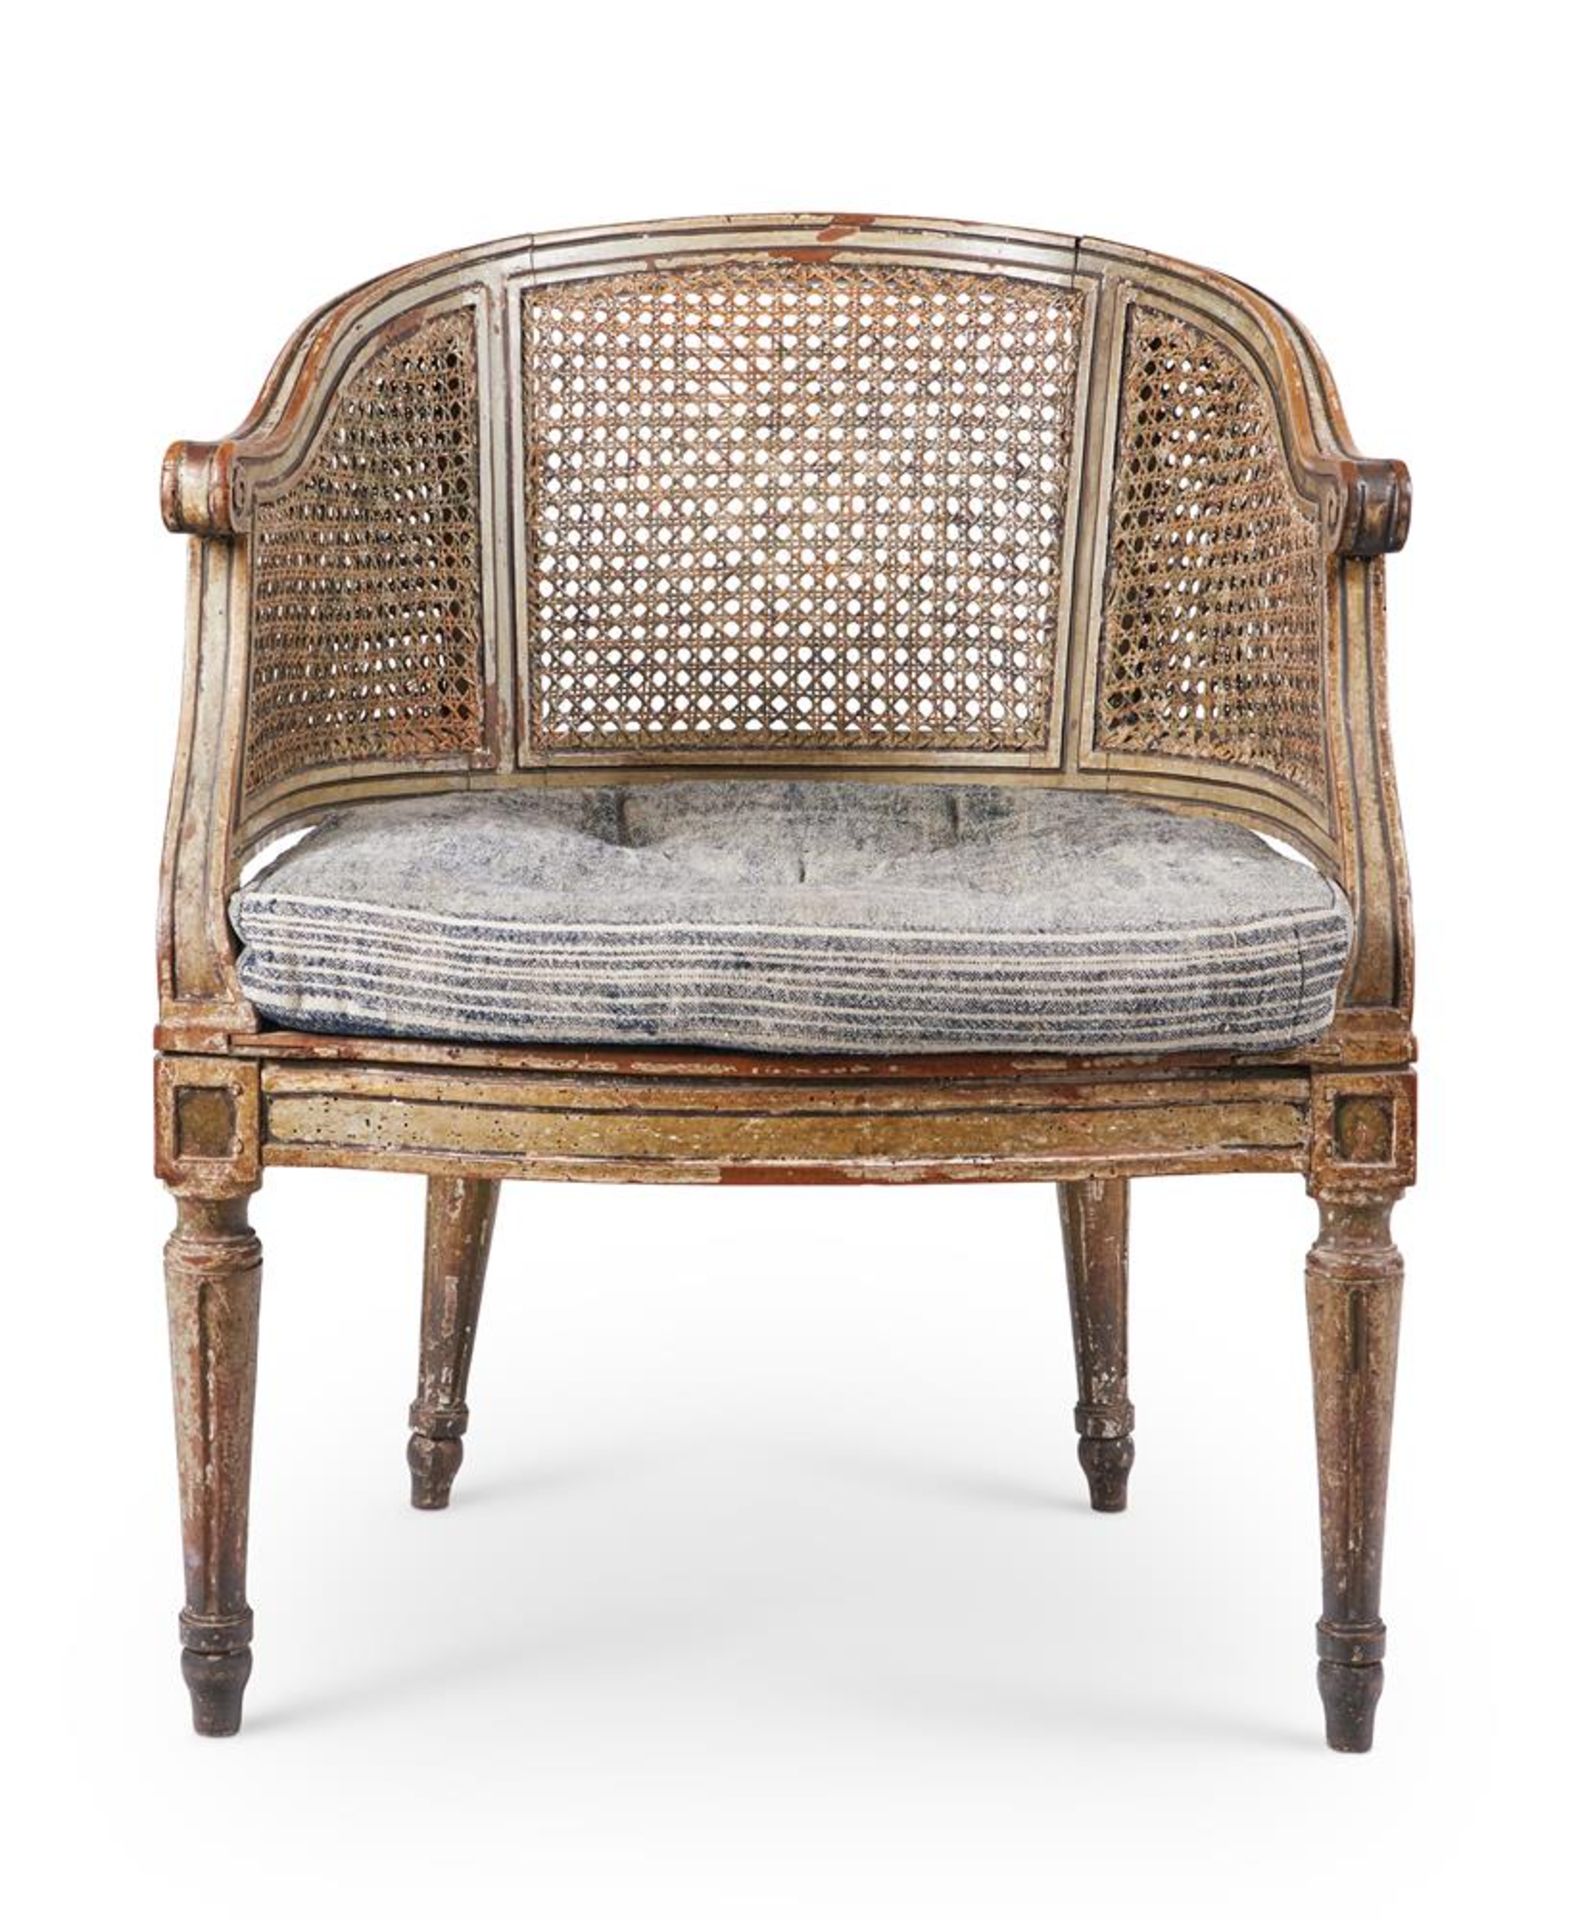 A LOUIS XVI PAINTED WALNUT BERGERE ARMCHAIR, LATE 18TH CENTURY - Image 5 of 6